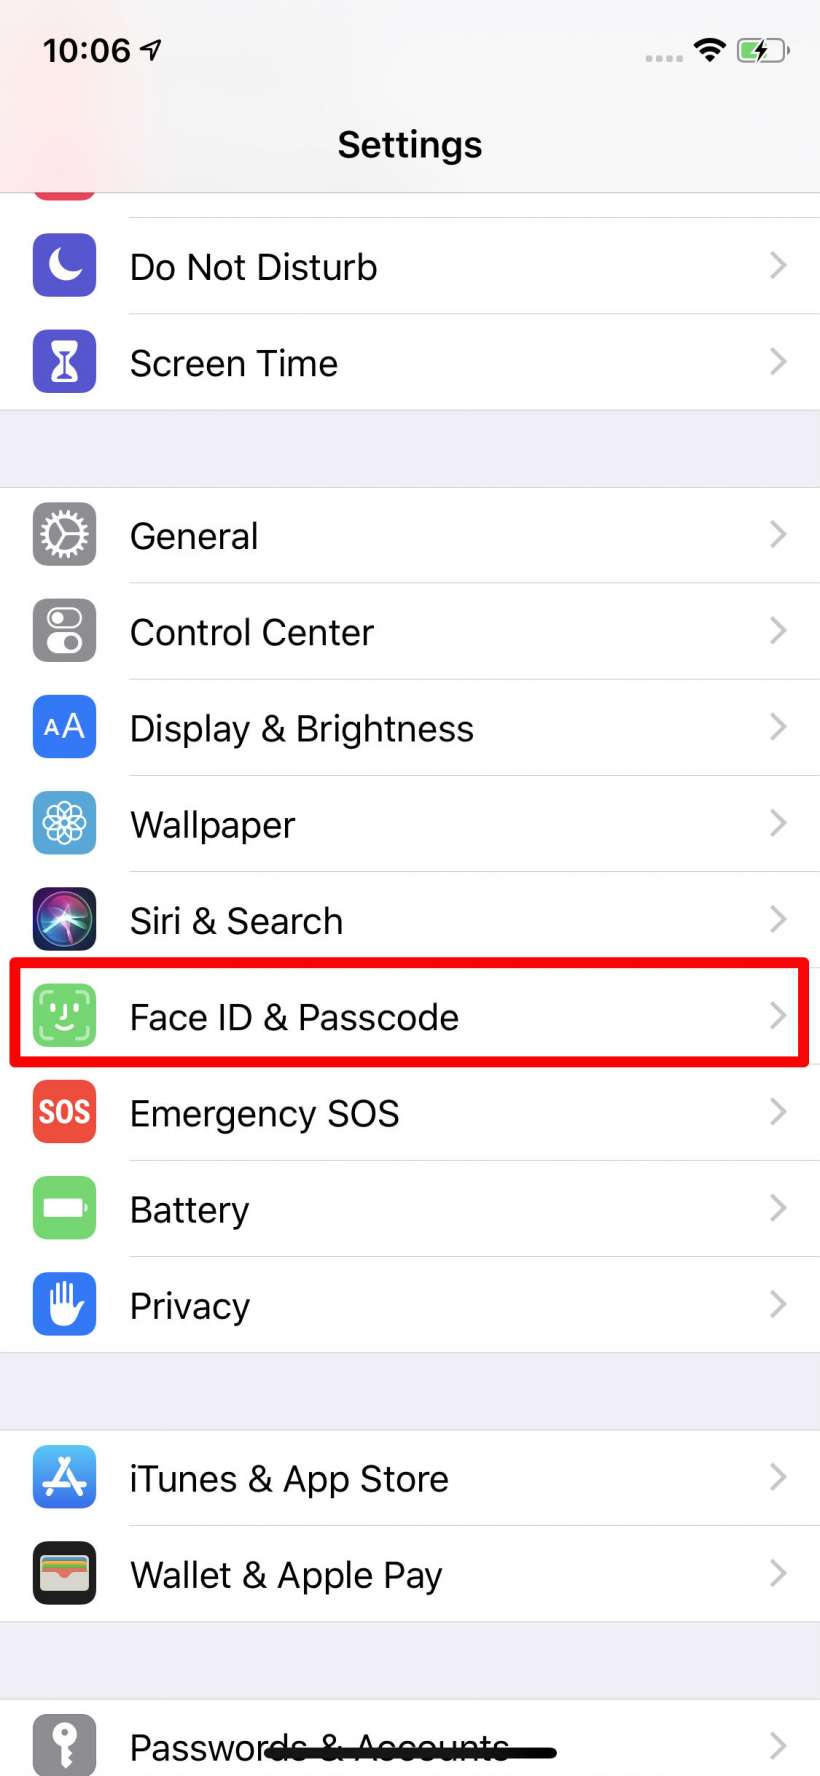 How to add a second person to Face ID on iPhone X.